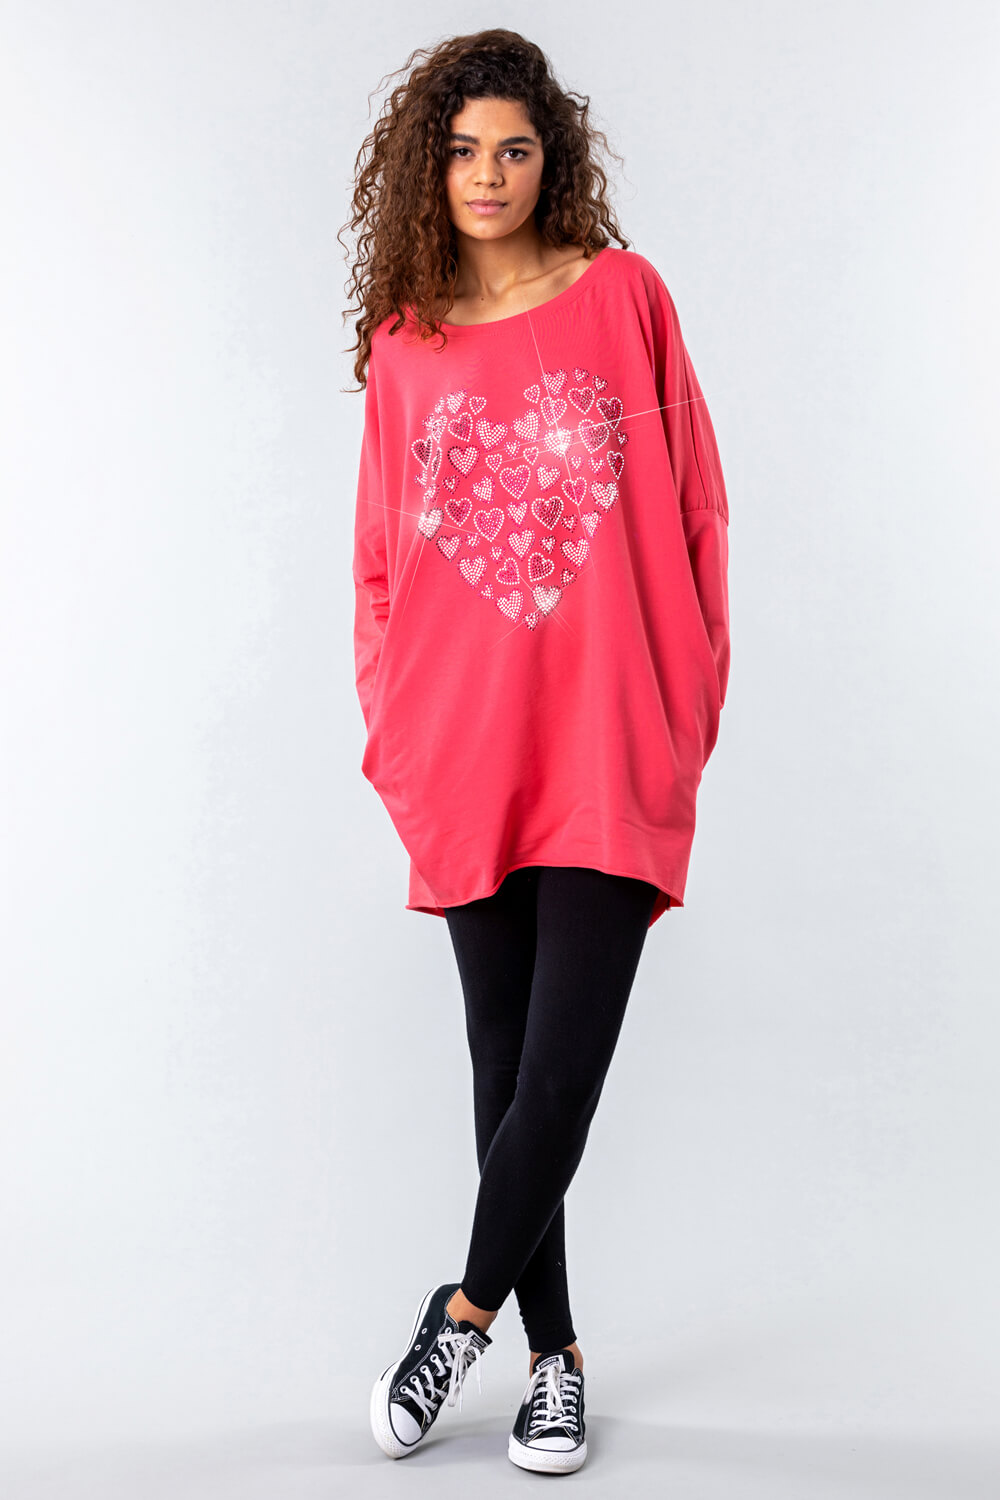 CORAL One Size Diamante Heart Print Top, Image 2 of 4